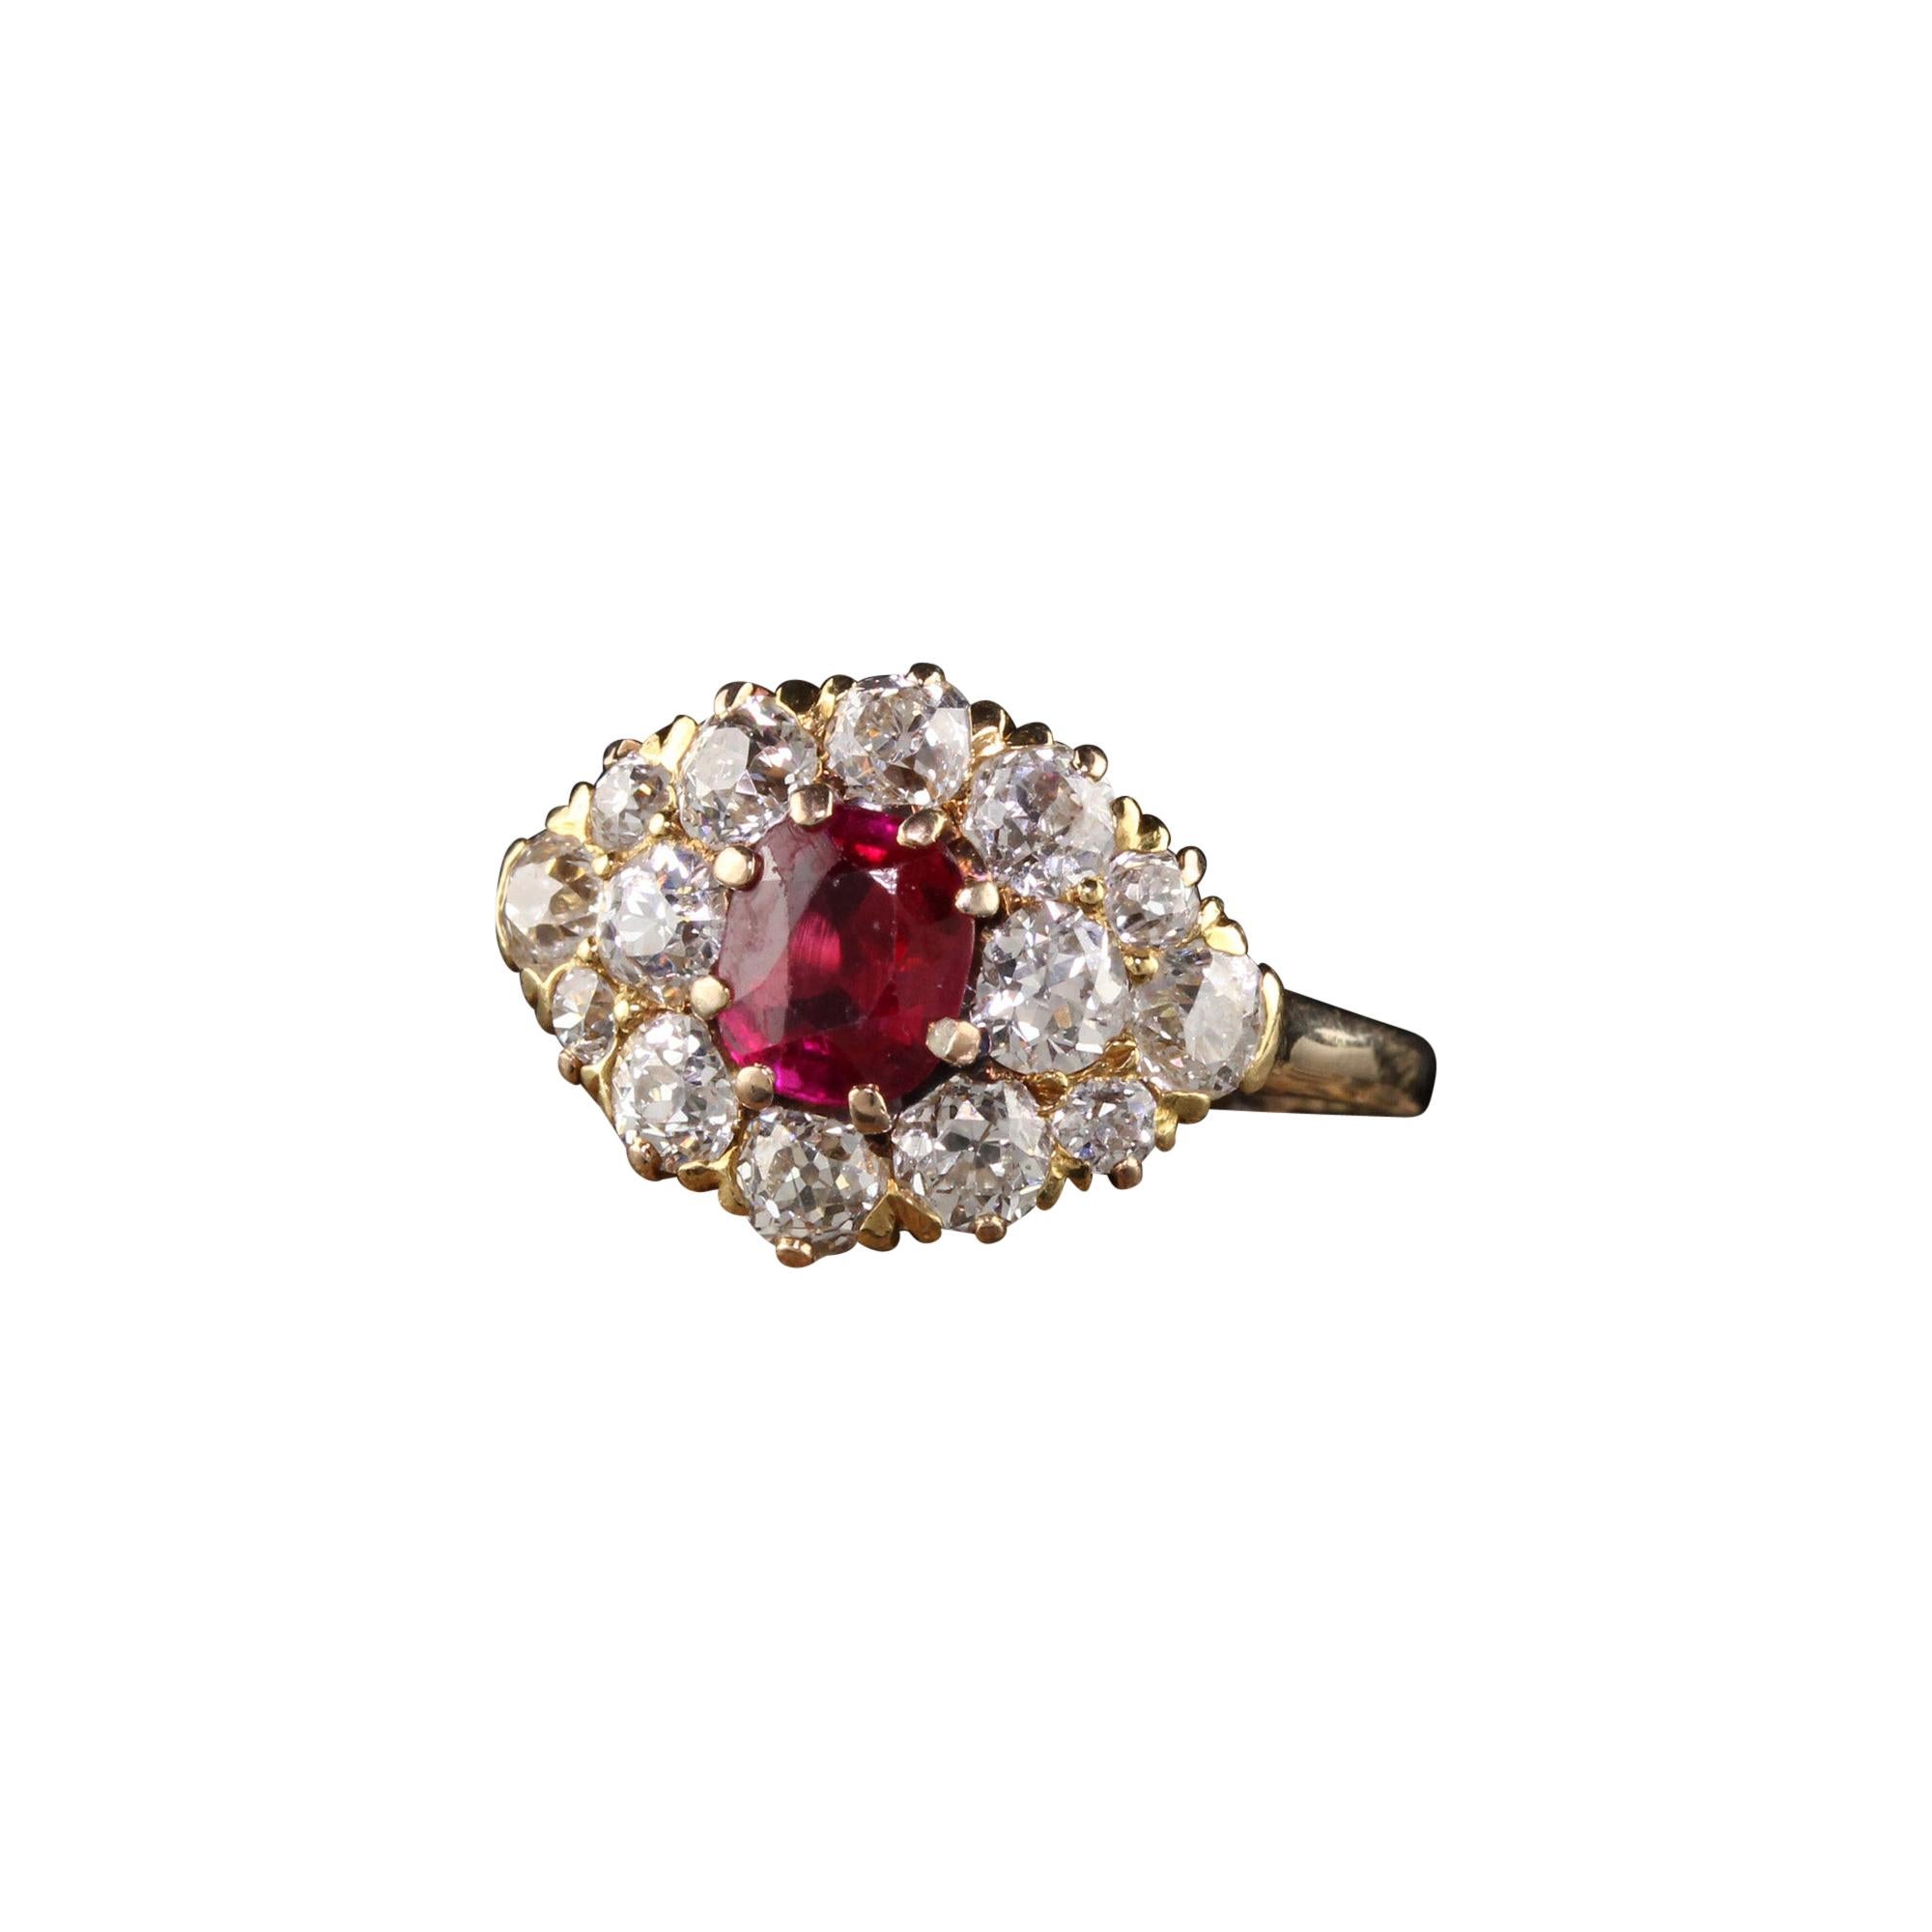 Antique Art Deco 14K Yellow Gold Old European Diamond Ruby Ring For Sale